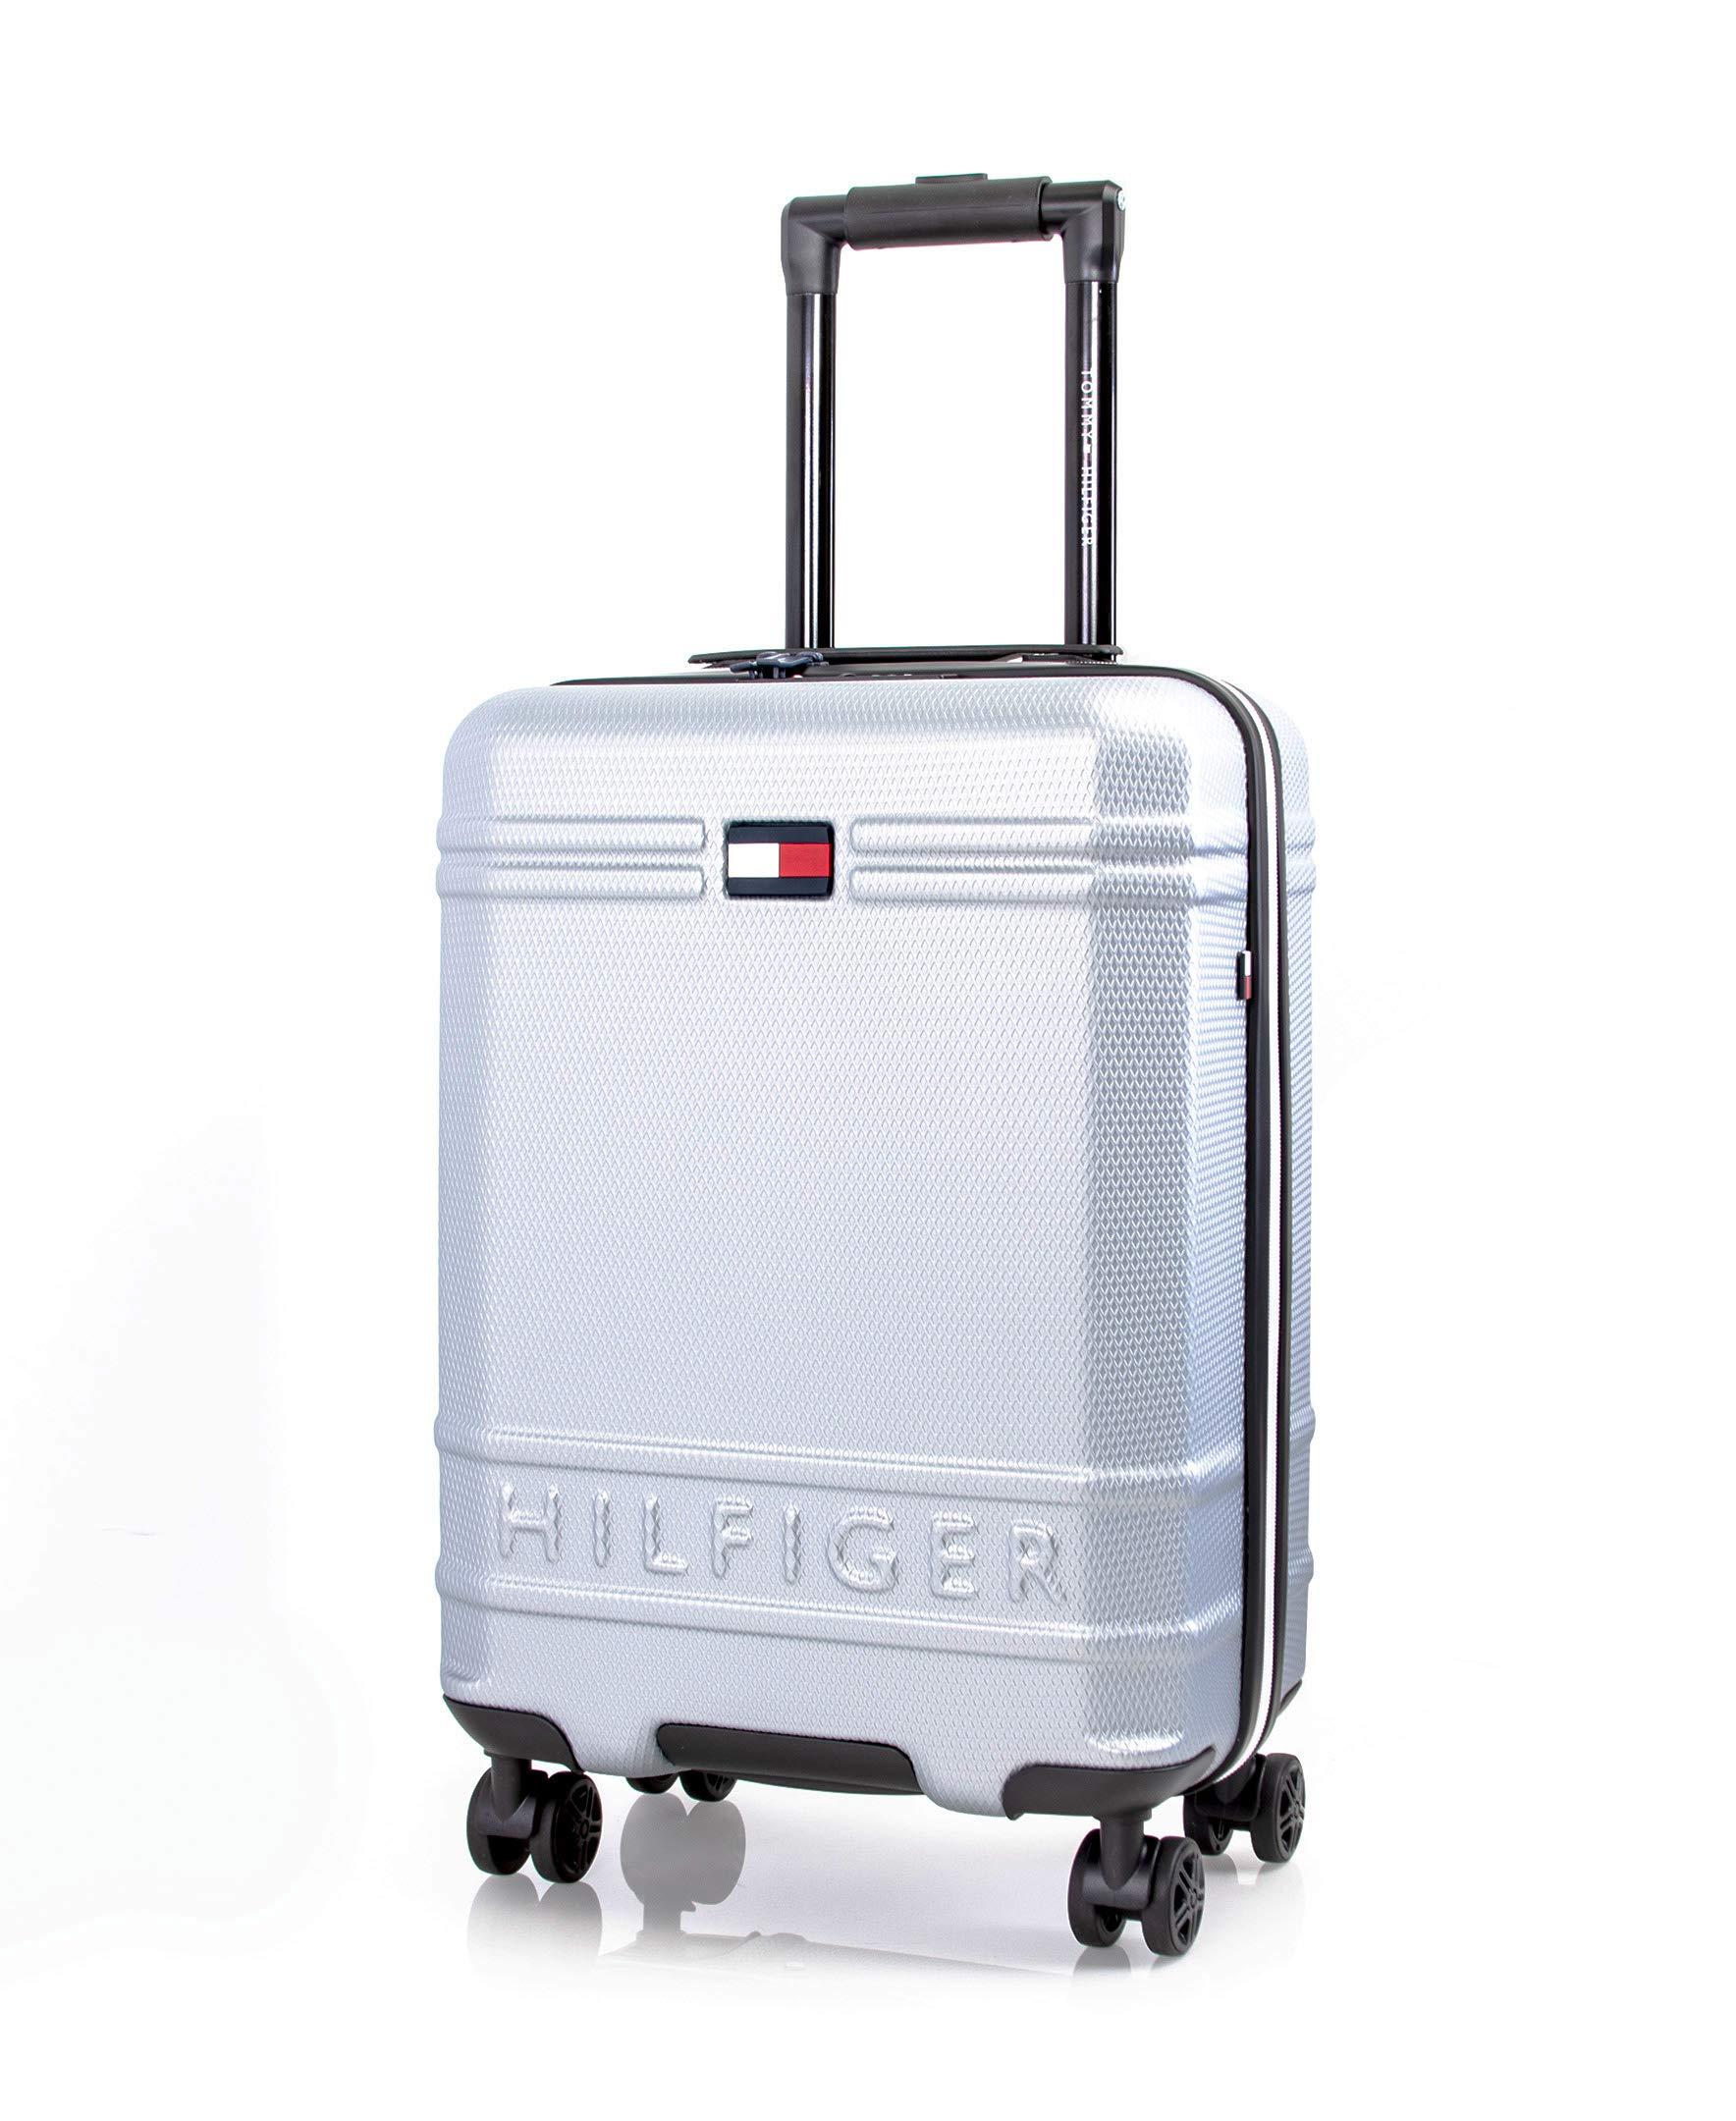 tommy hilfiger luggage came locked